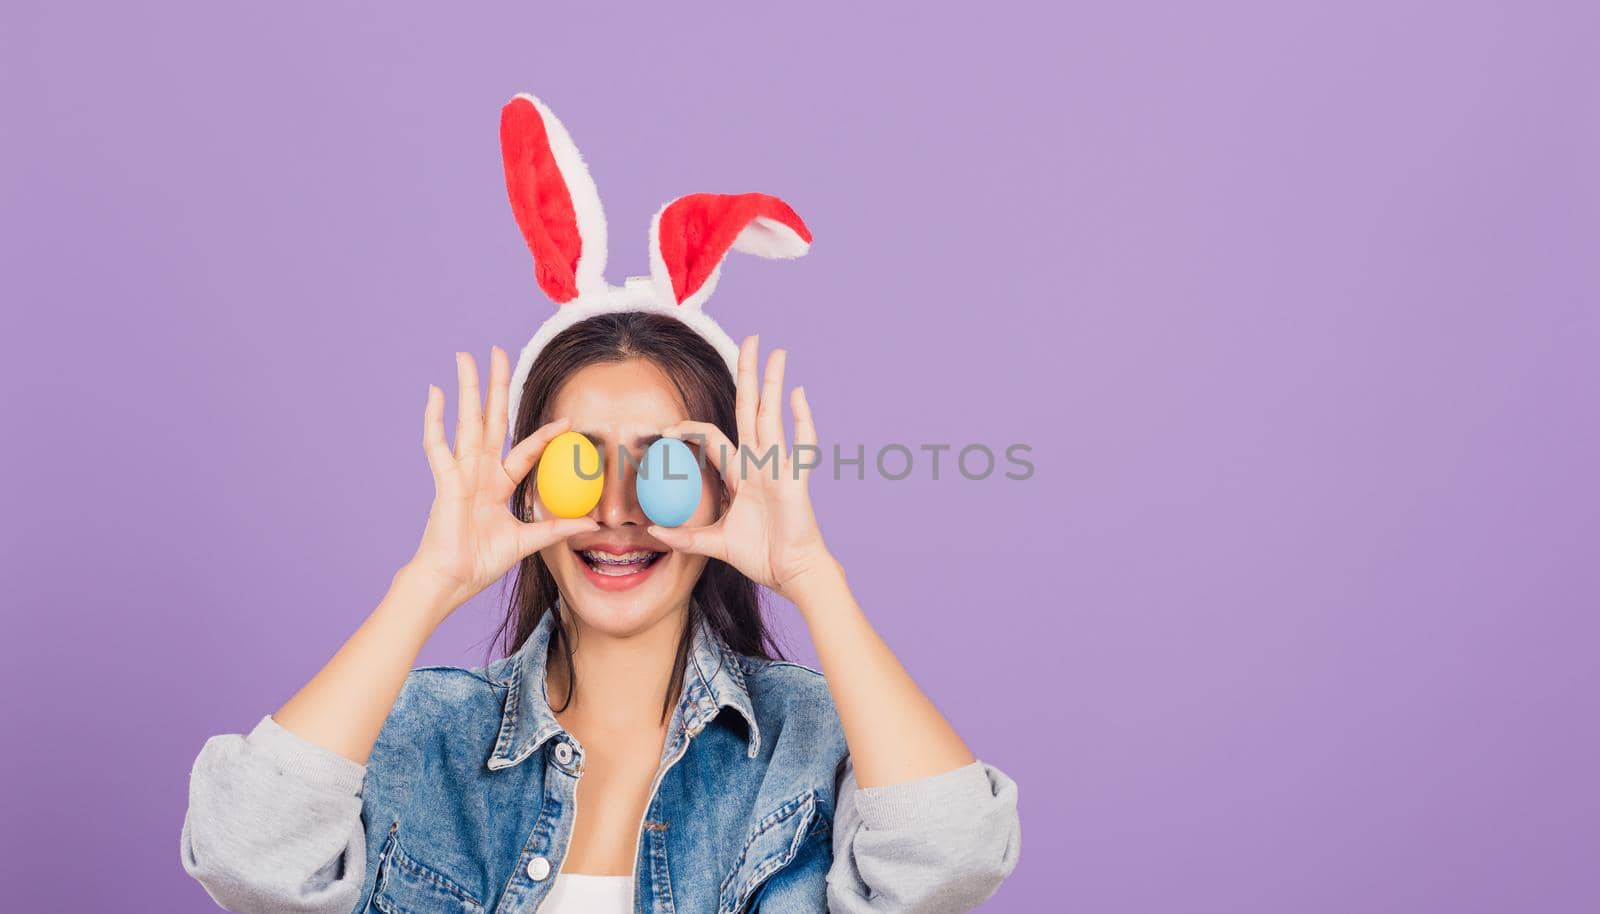 woman smiling wearing rabbit ears and denims holding colorful Easter eggs front eyes by Sorapop